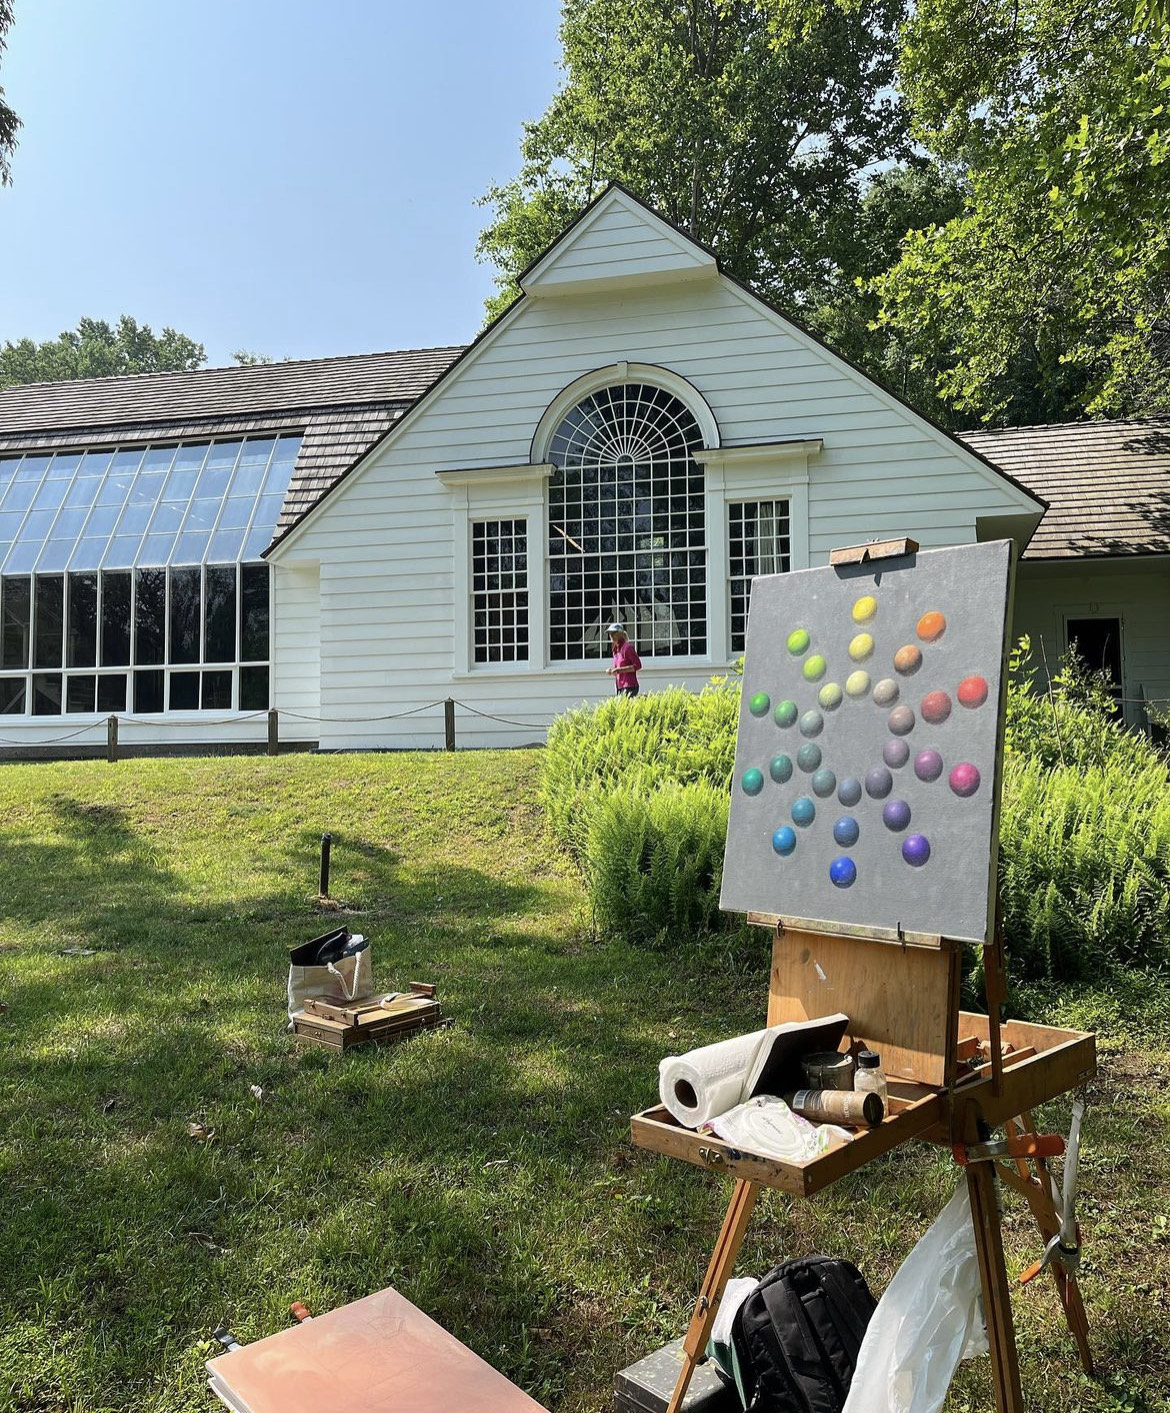 PLEIN AIR PAINTING WORKSHOP WITH RANDALL GRAHAM AT THE N. C. WYETH HOUSE & STUDIO